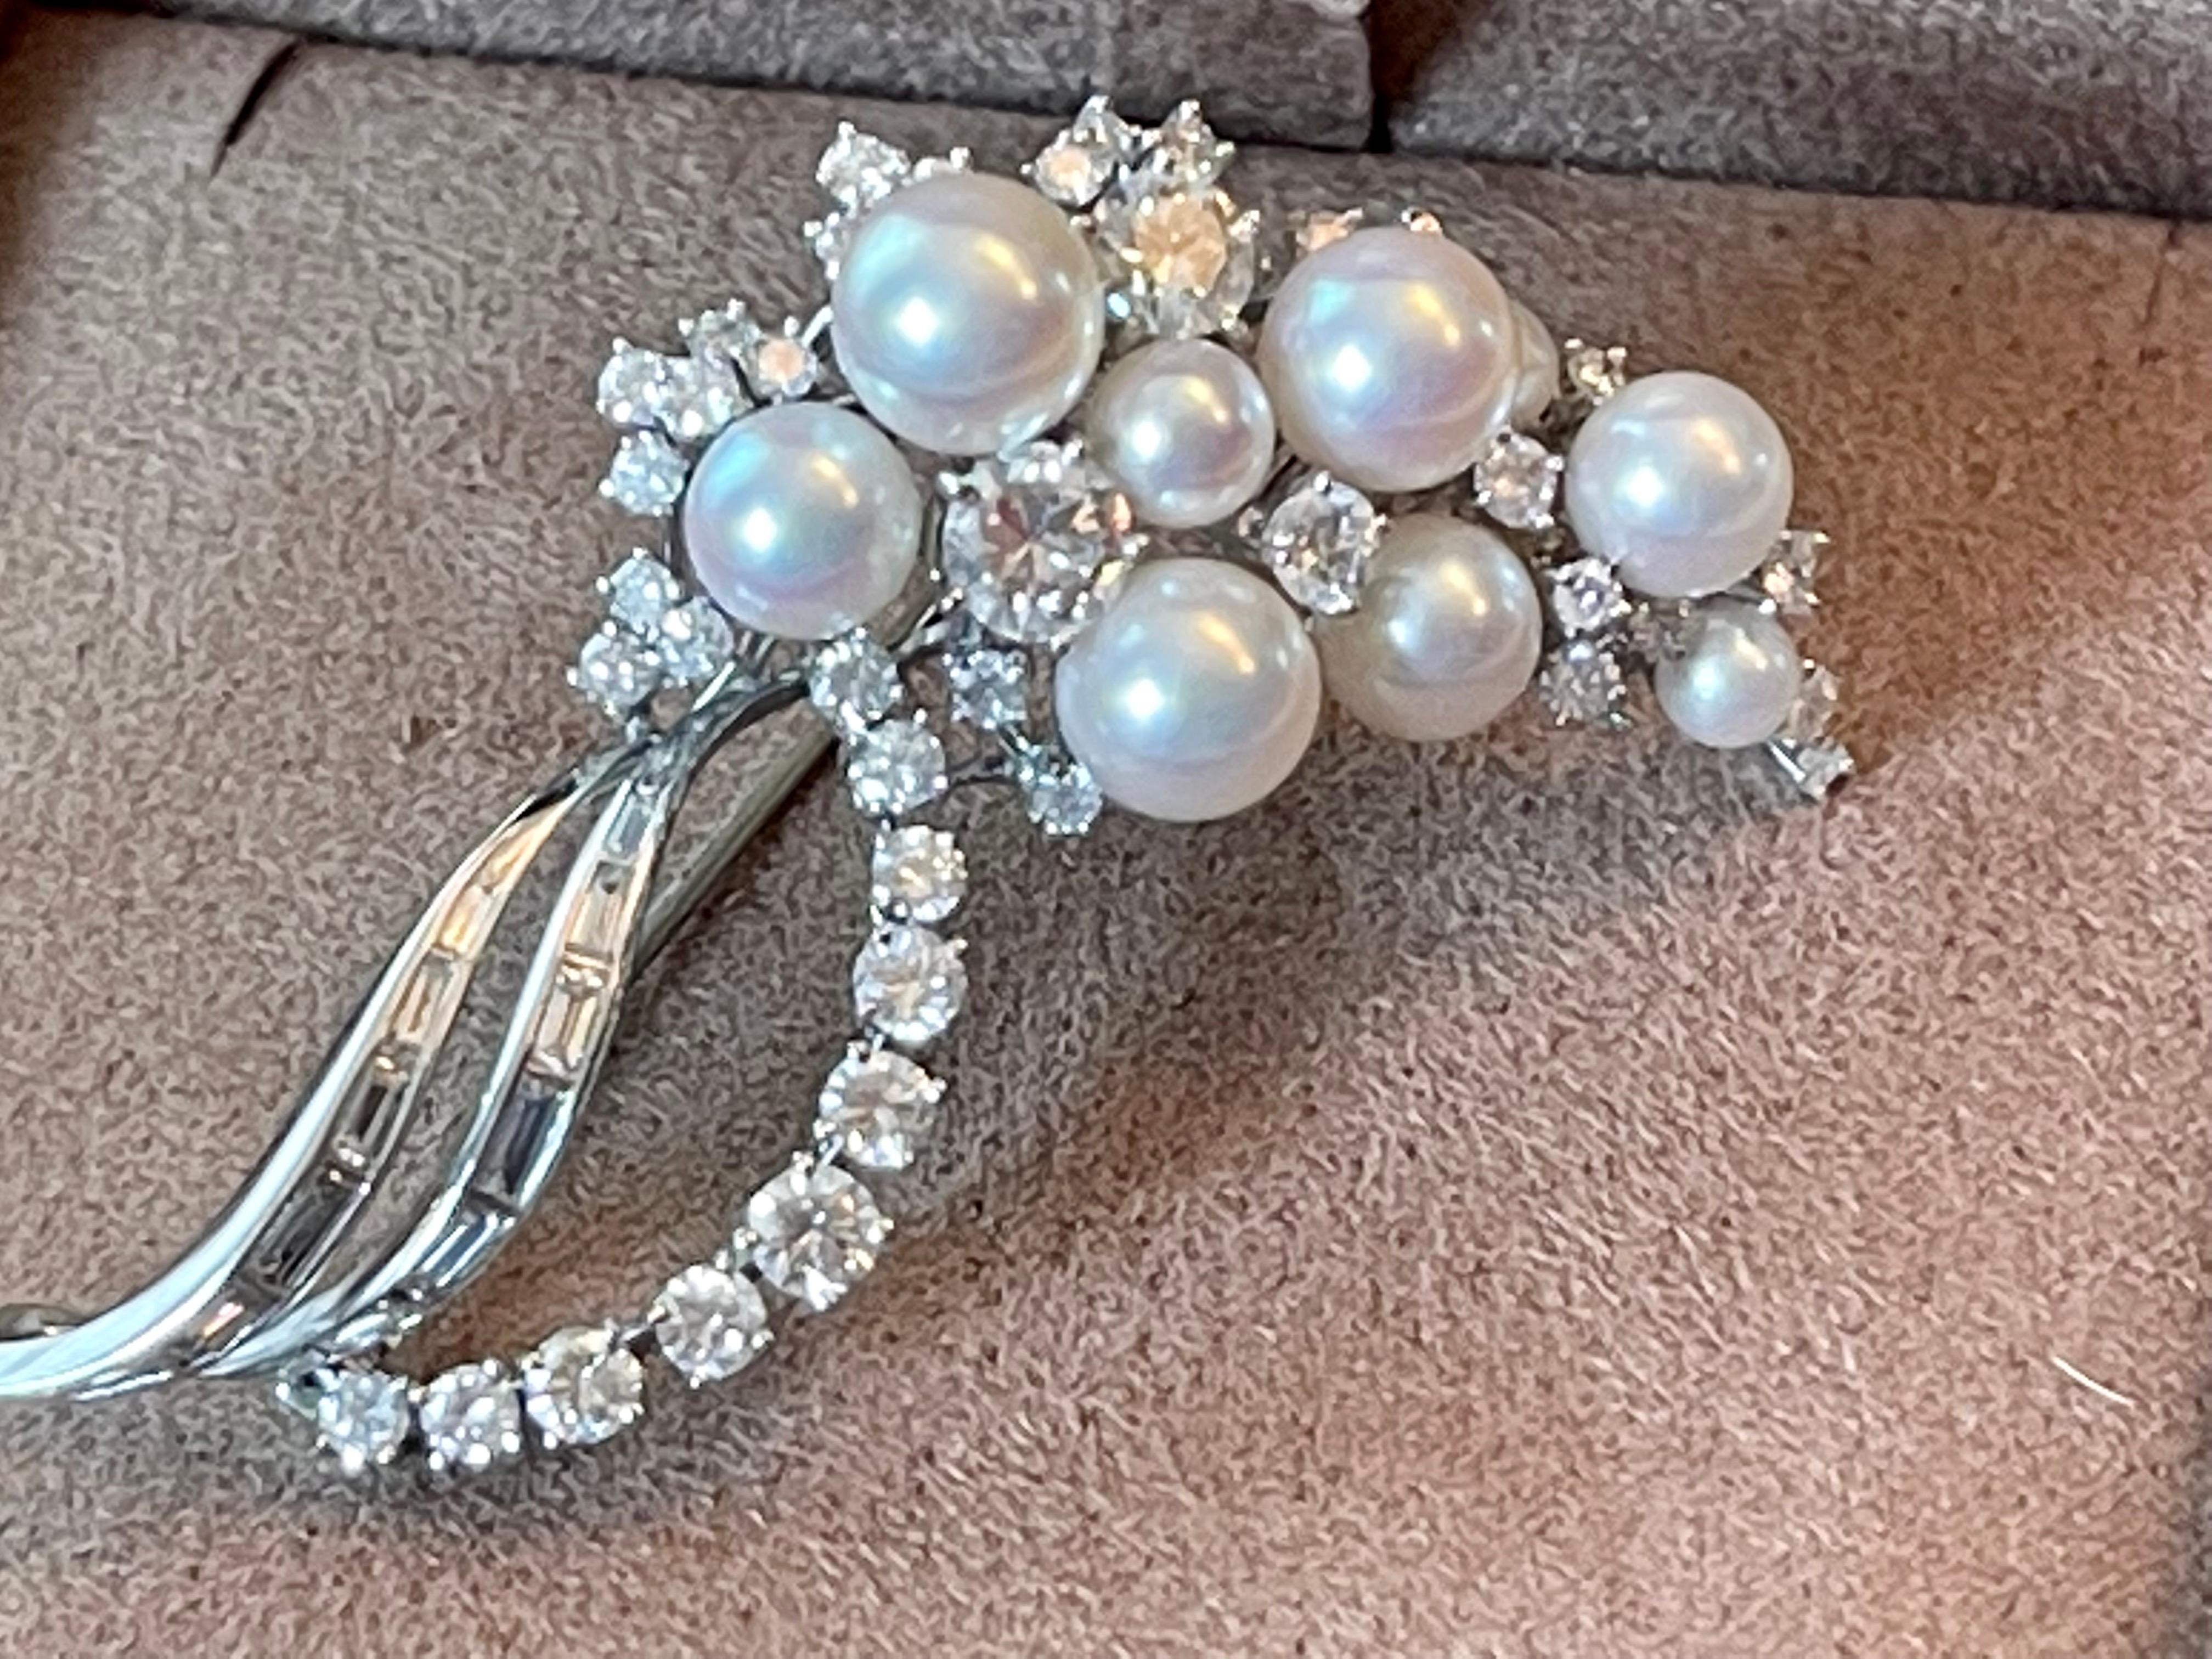 Contemporary Elegant 18 K White Gold Brooch Diamond Akoya Pearls circa 1970 by Meister Zurich For Sale